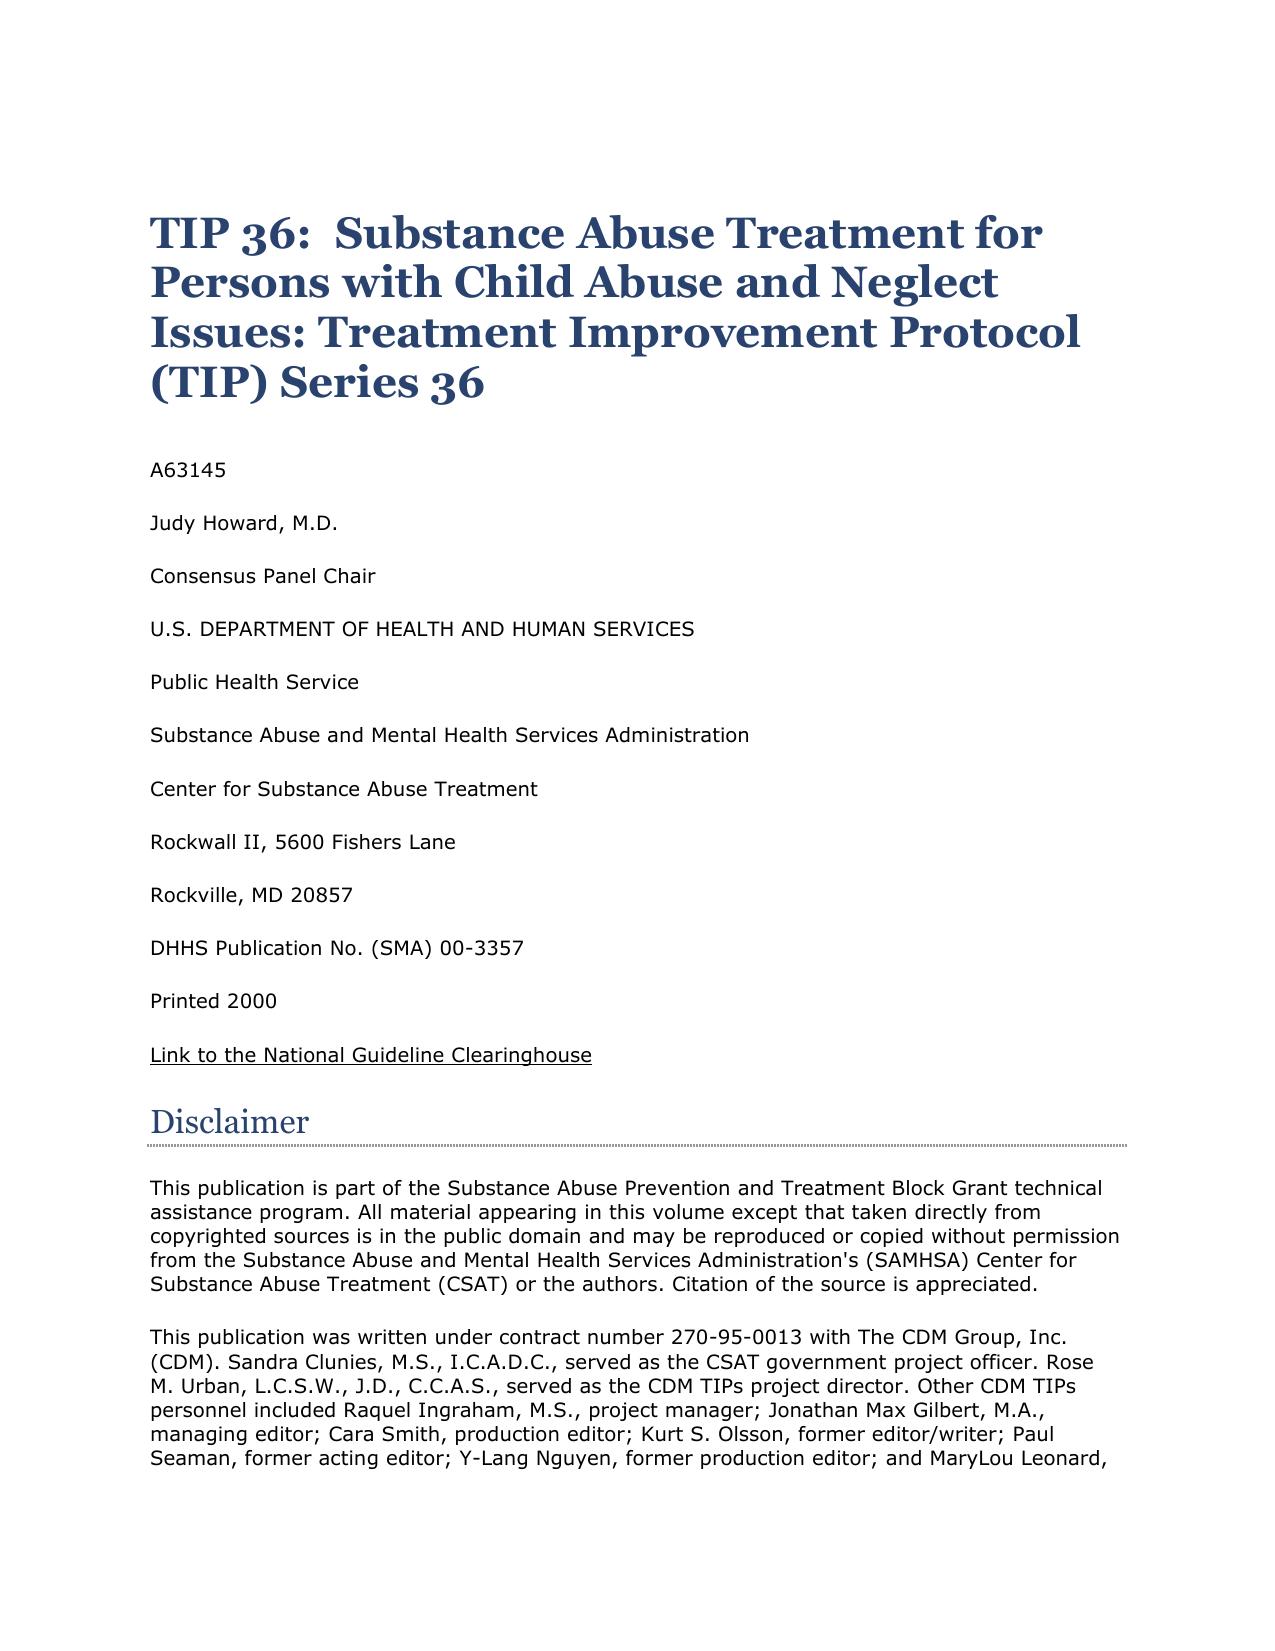 TIP 36 Substance Abuse Treatment for Persons with Child Abuse and Neglect  2000